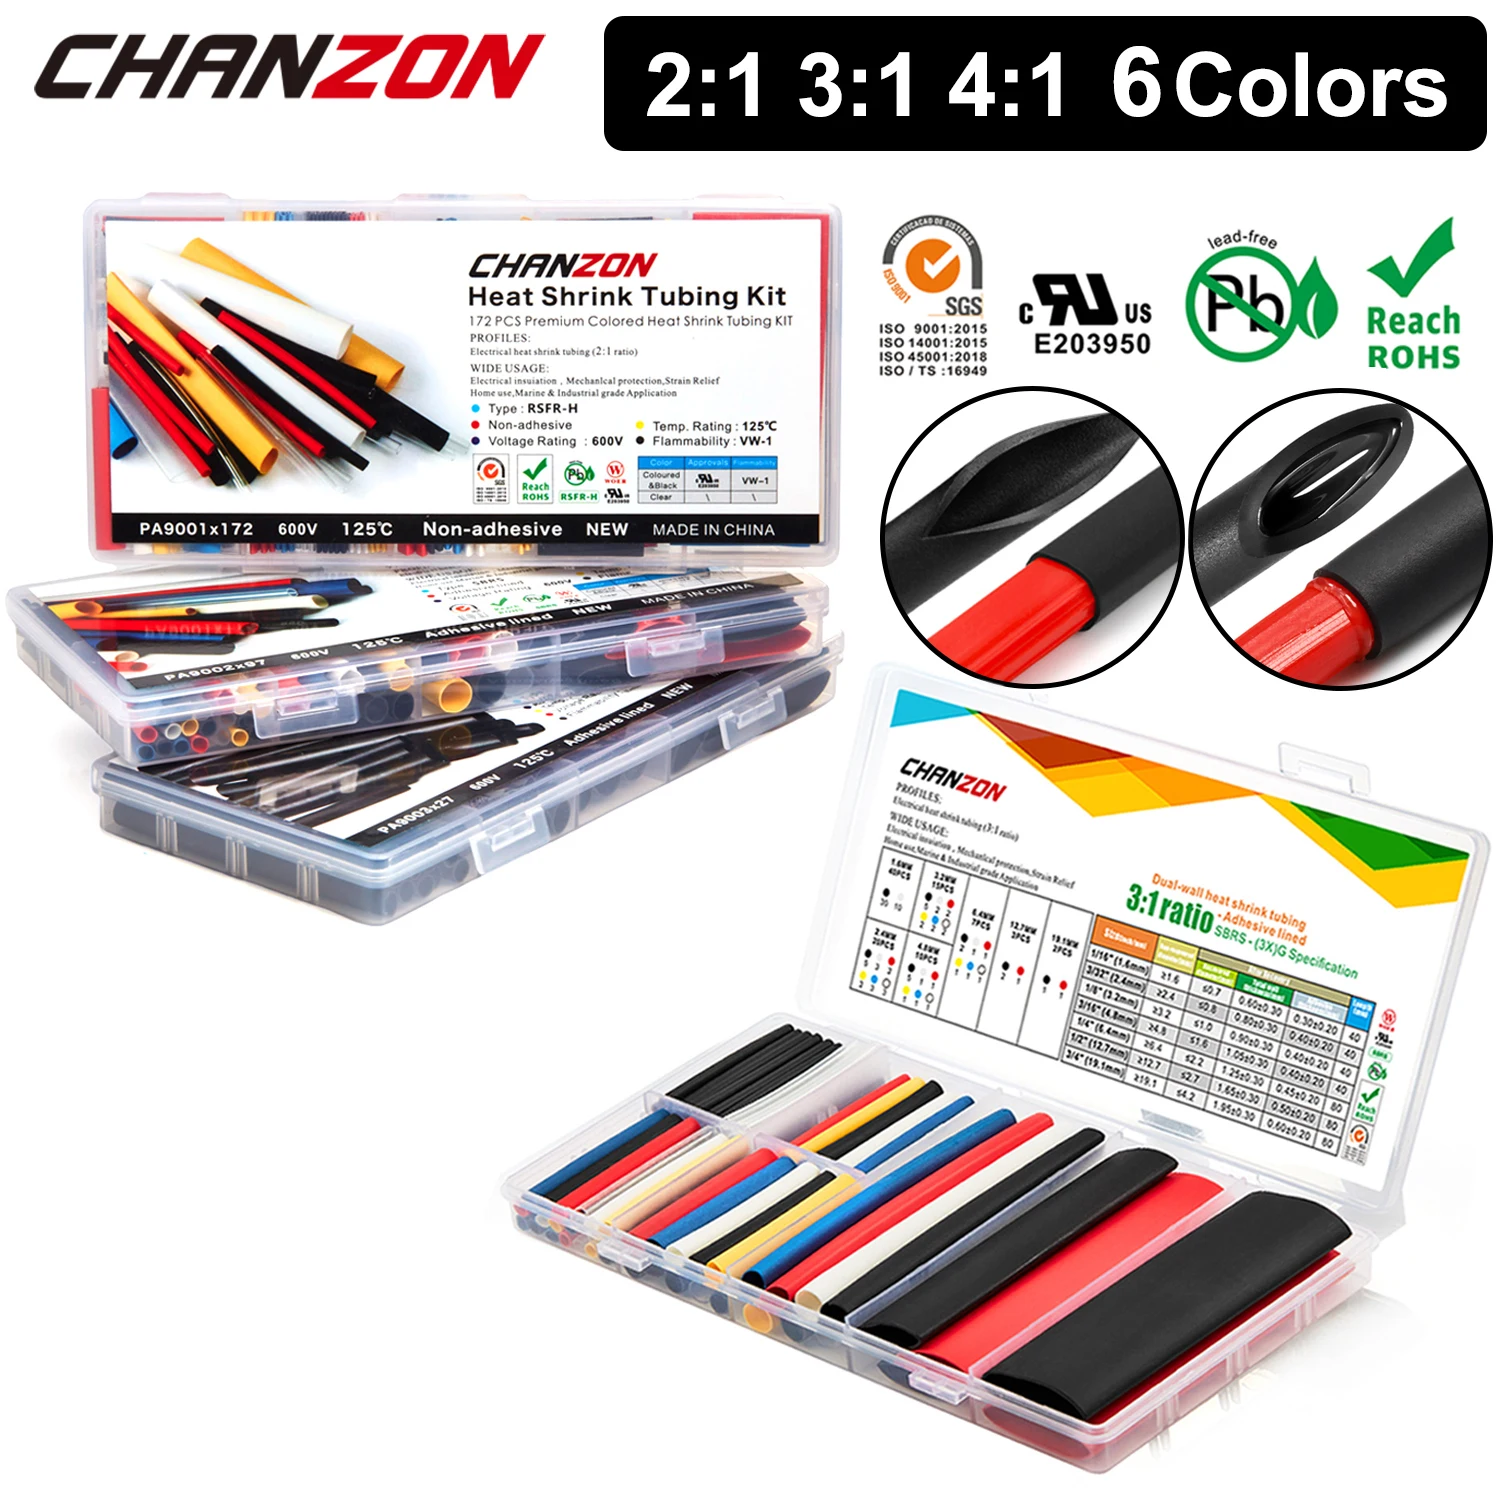 2:1 3:1 4:1 6 Multi Color Heat Shrink Tube Kit Polyolefin Wrap Insulation Cable Marine Grade Heat-shrink Pipe Assorted for Wires